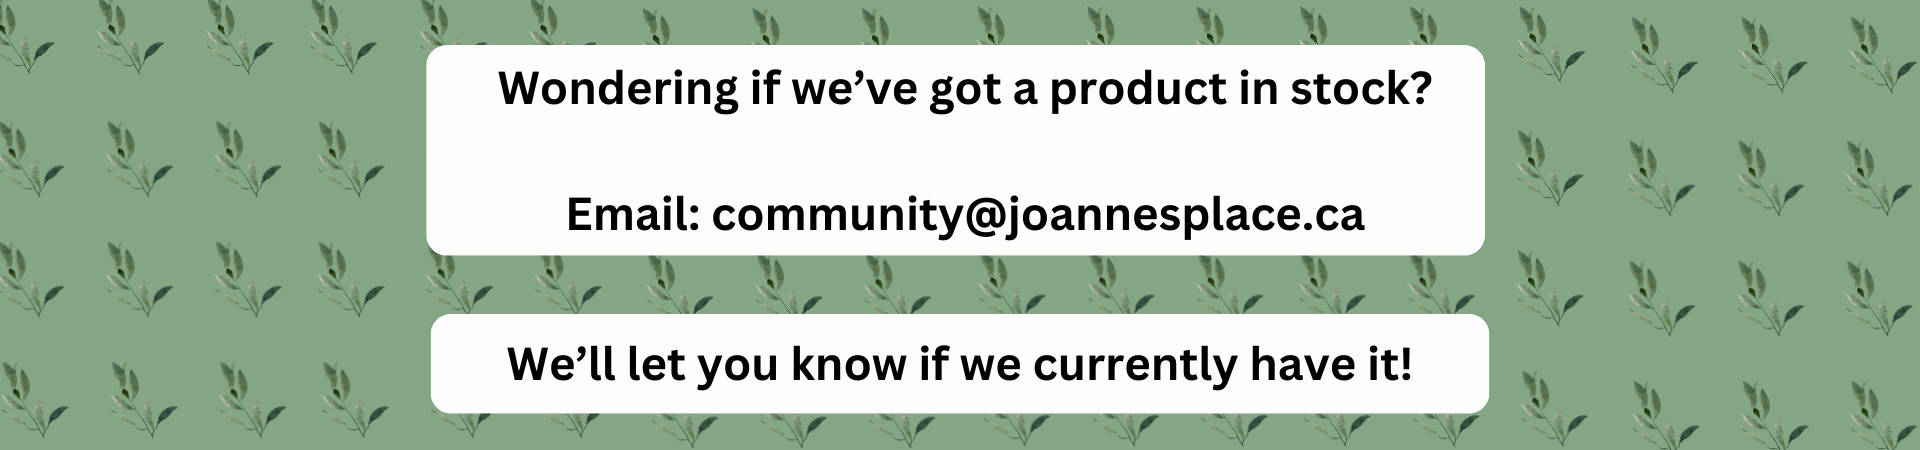 Wondering if we have a product in stock? send us an email at community@joannesplace.ca